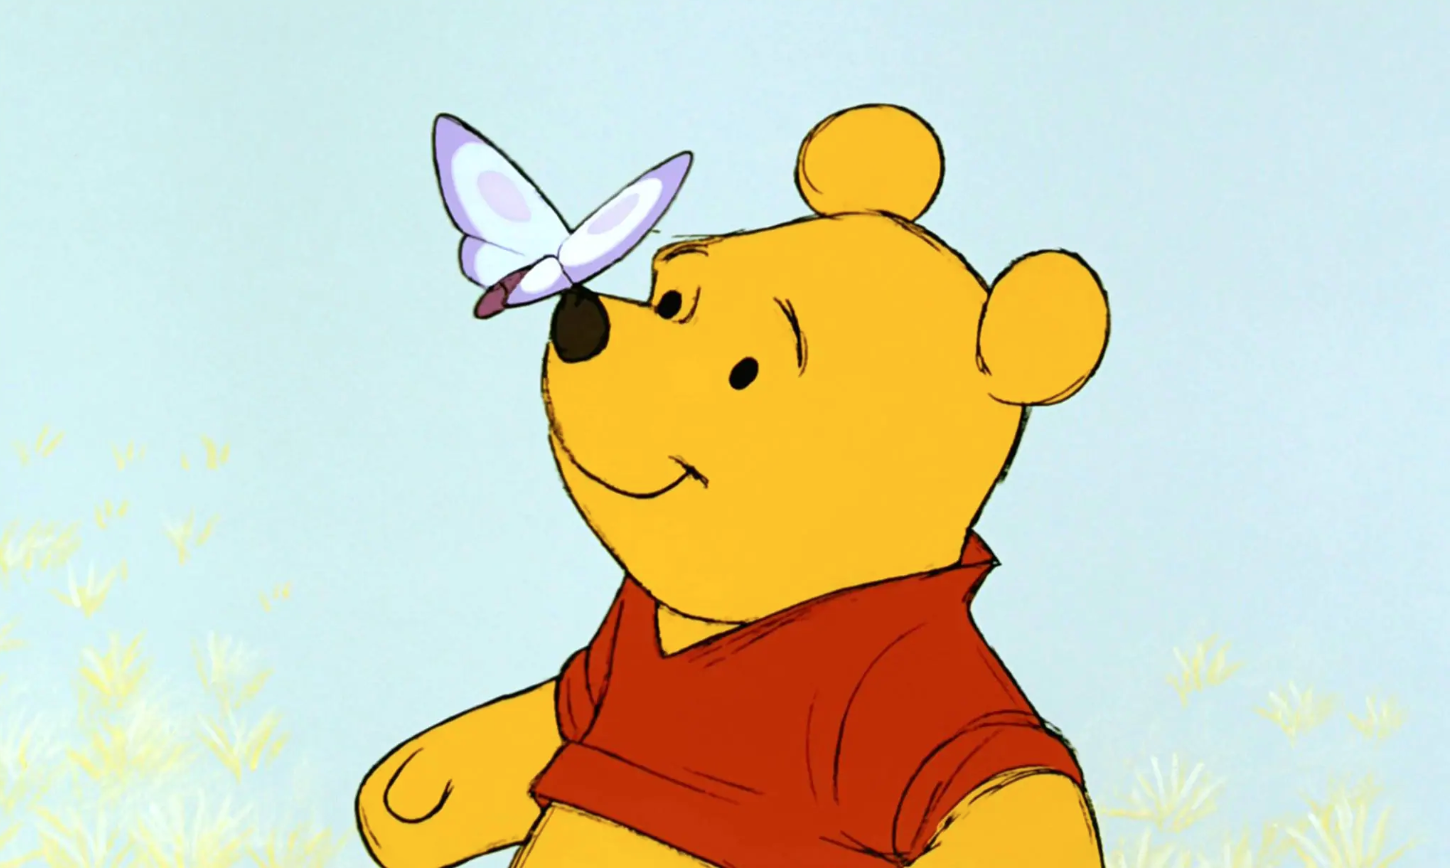 7 lessons Winnie the Pooh day can teach us on life, love 